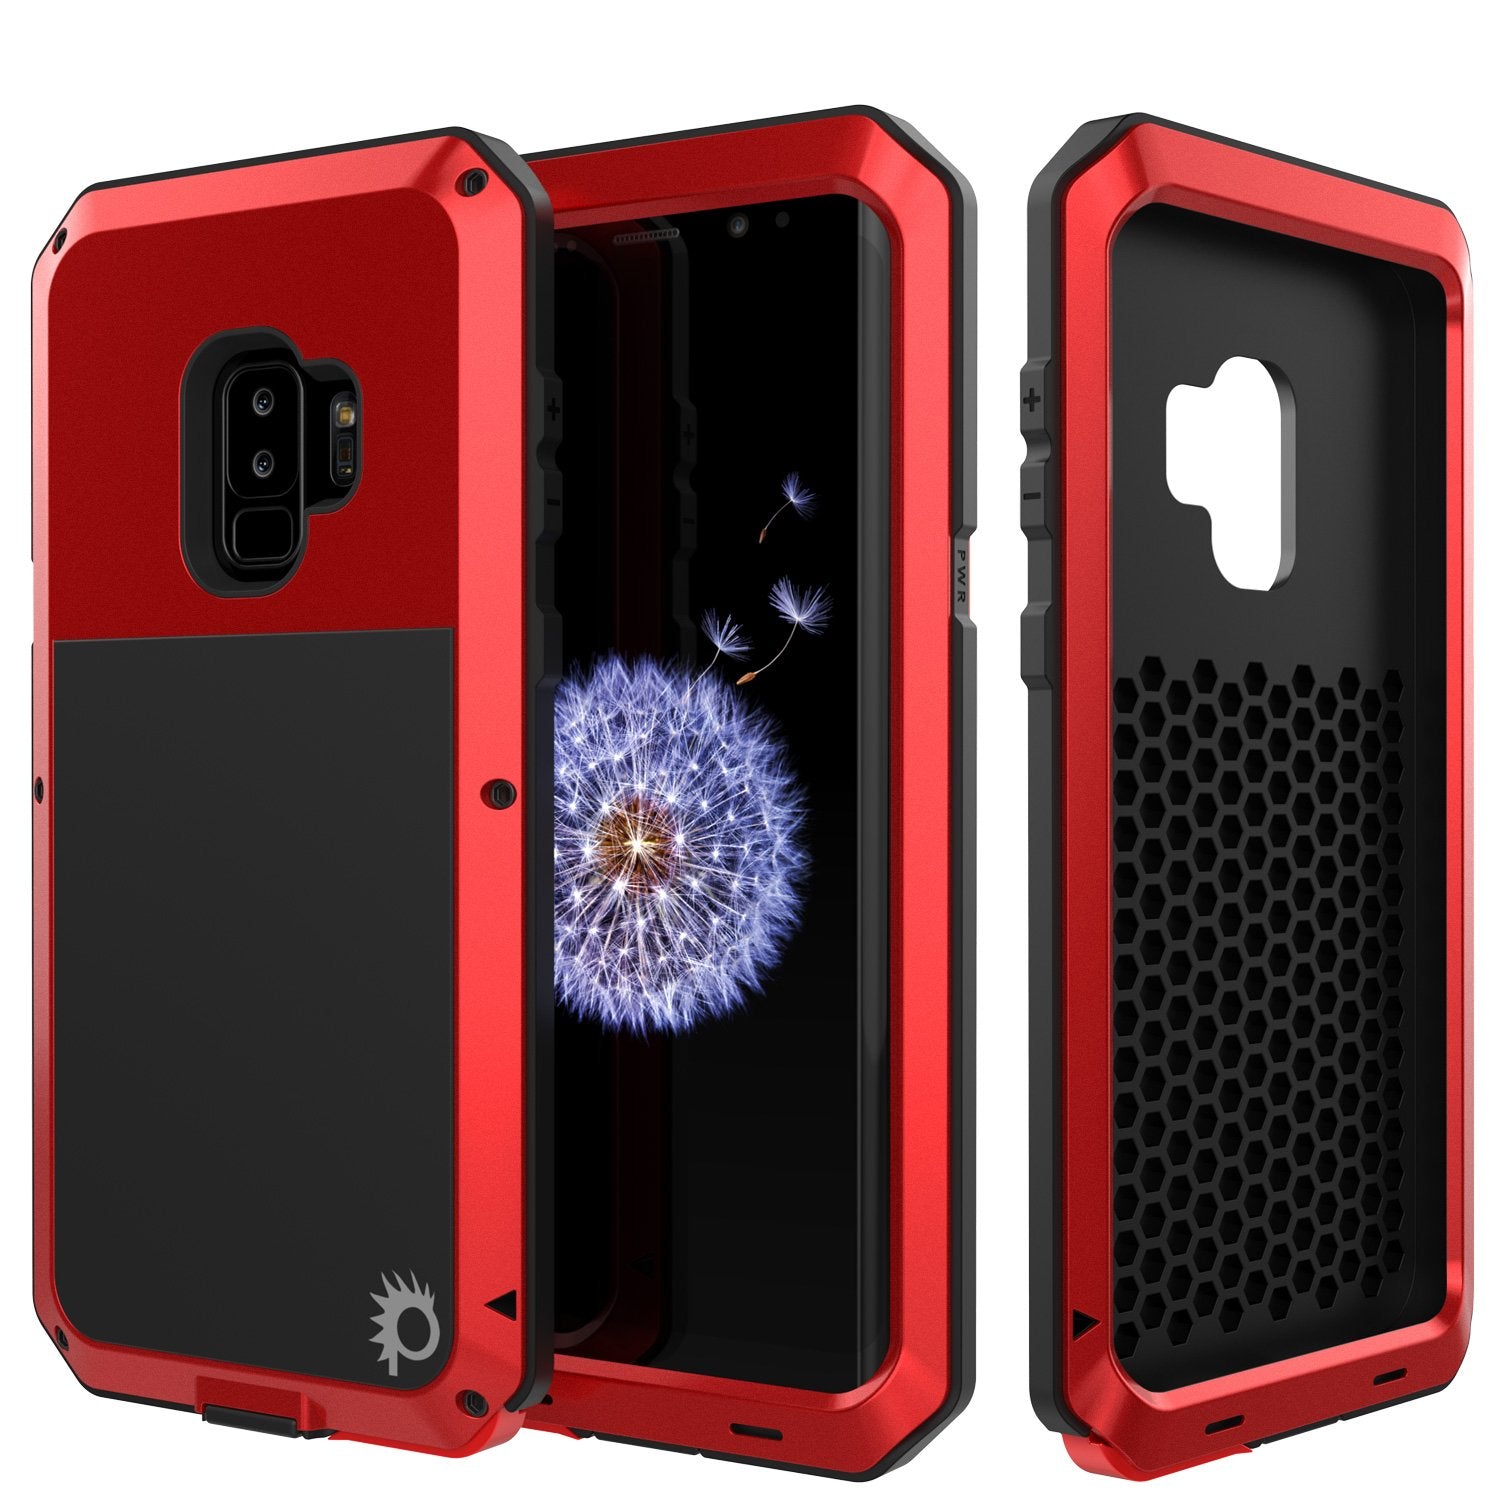 Galaxy S9 Plus Metal Case, Heavy Duty Military Grade Rugged Armor Cover [shock proof] Hybrid Full Body Hard Aluminum & TPU Design [non slip] W/ Prime Drop Protection for Samsung Galaxy S9 Plus [Red]